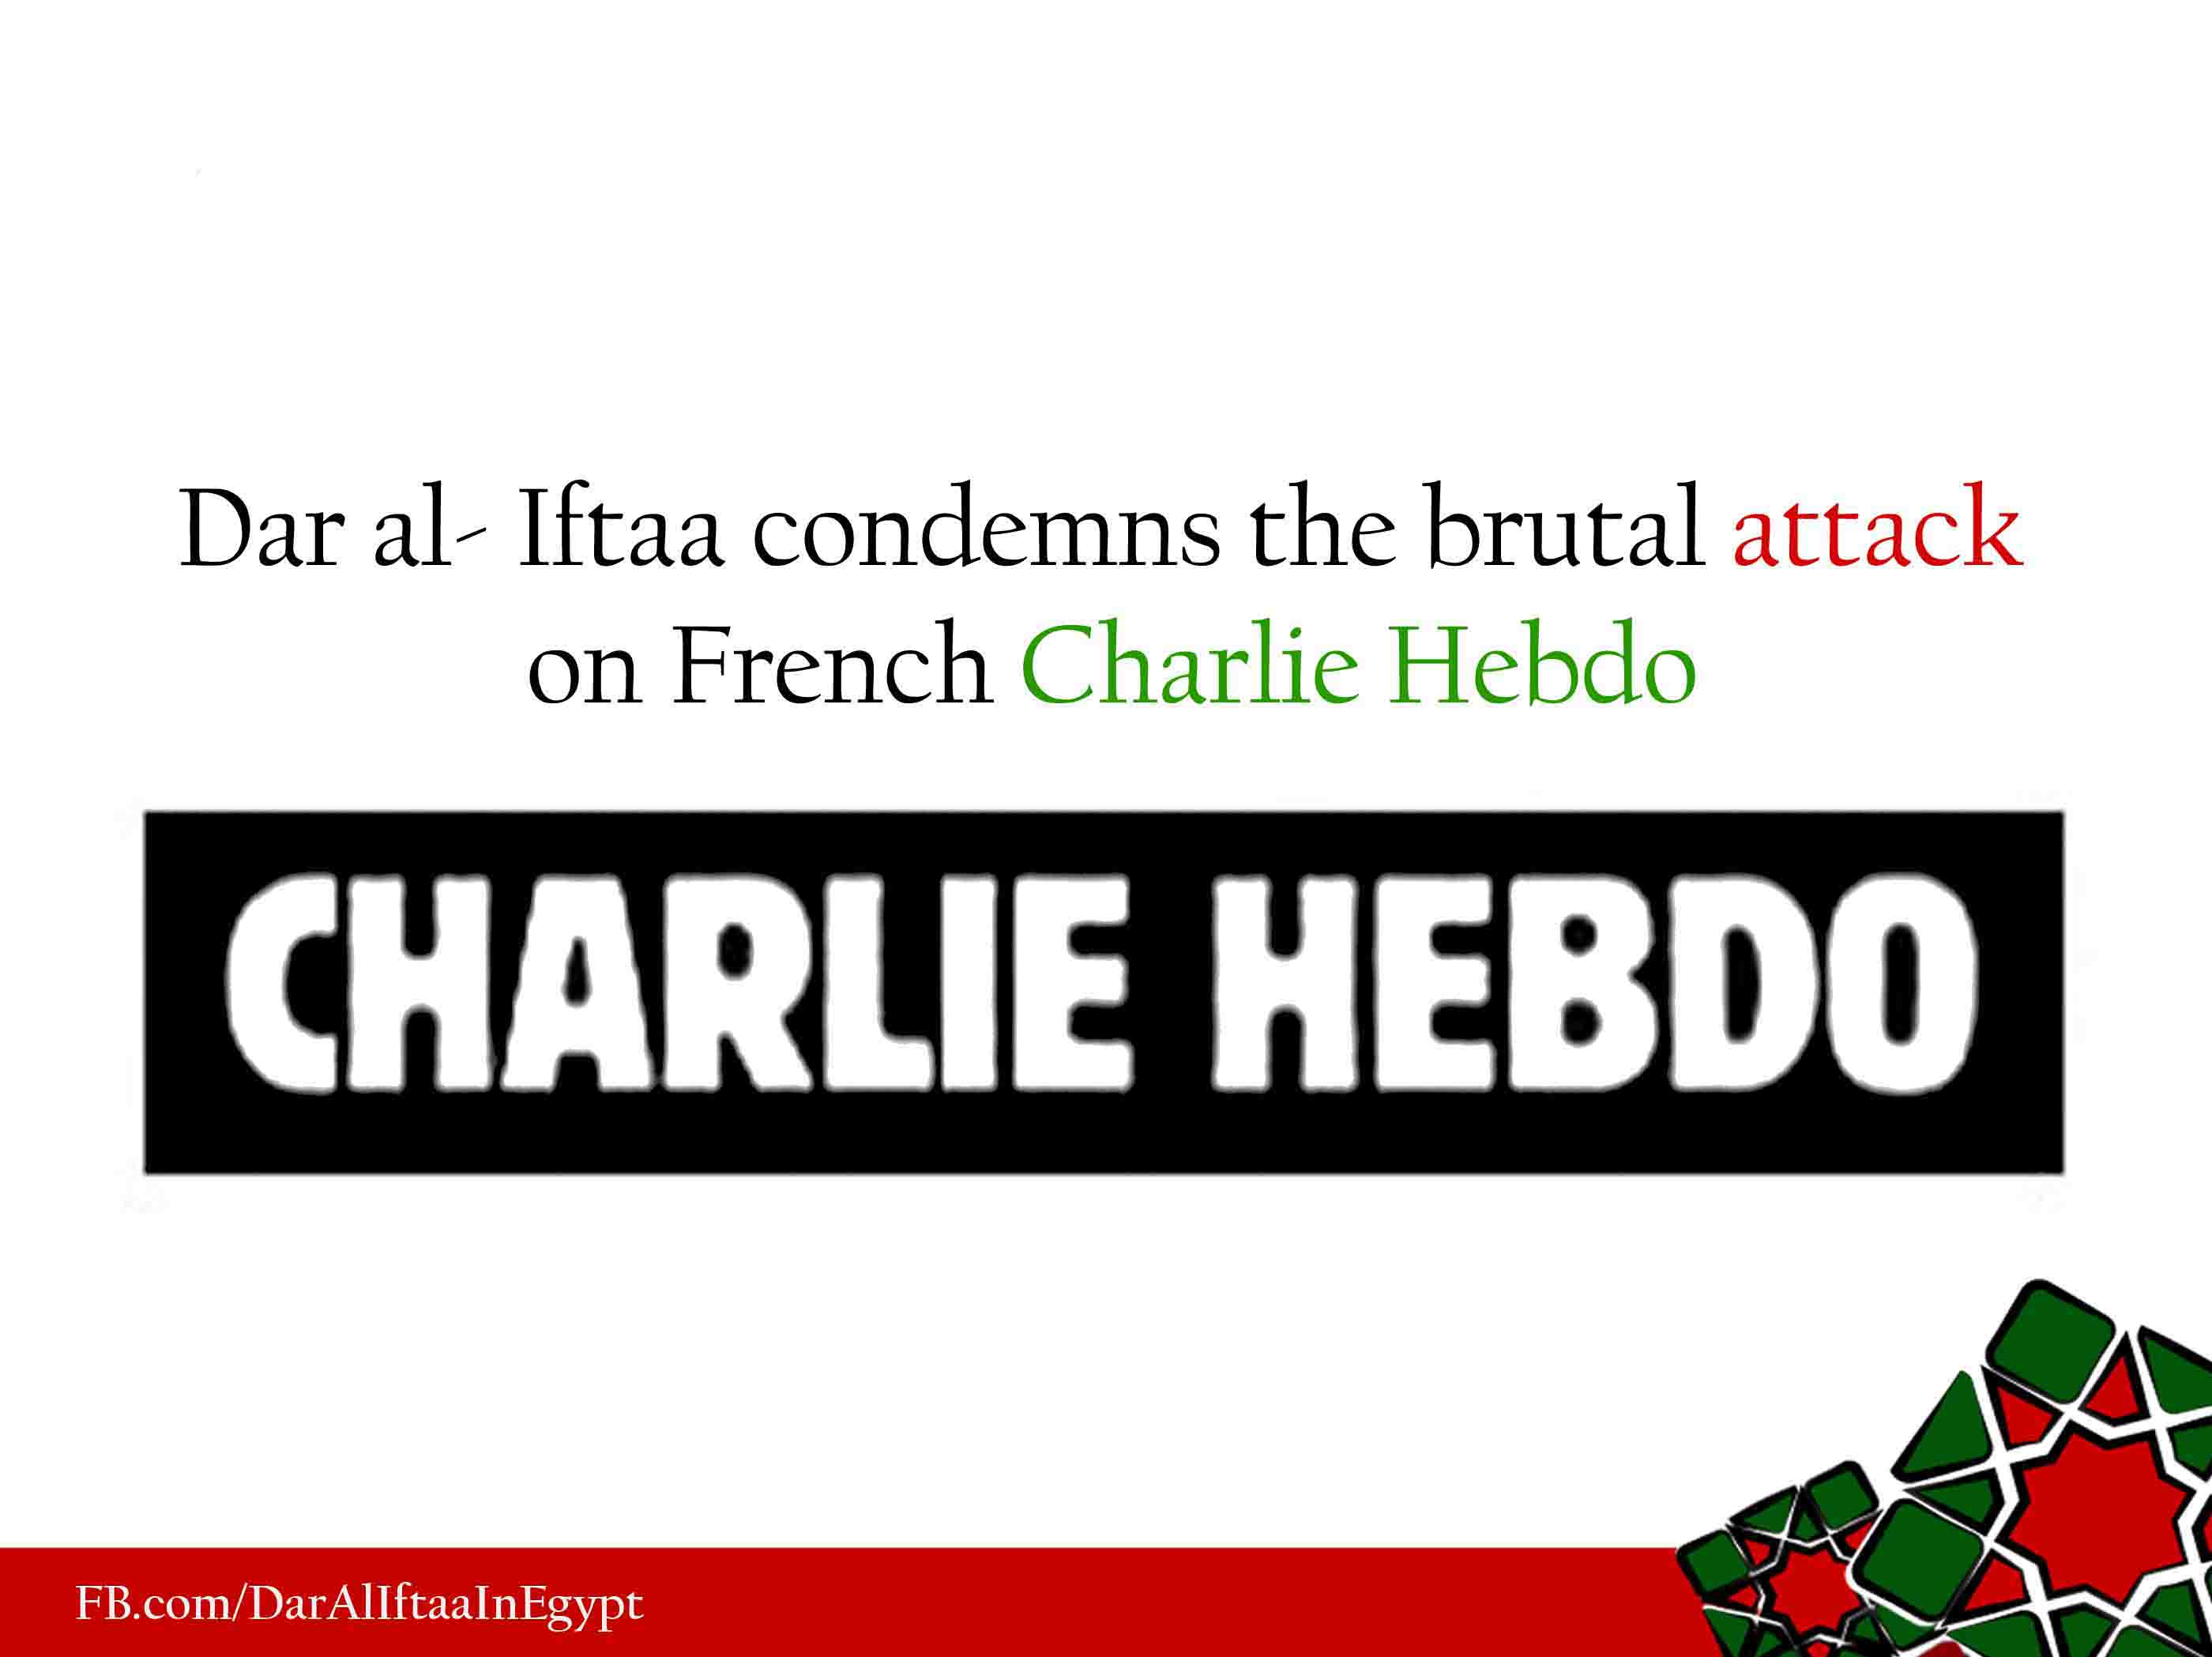 Dar al- Iftaa condemns the brutal attack on French Charlie Hebdo